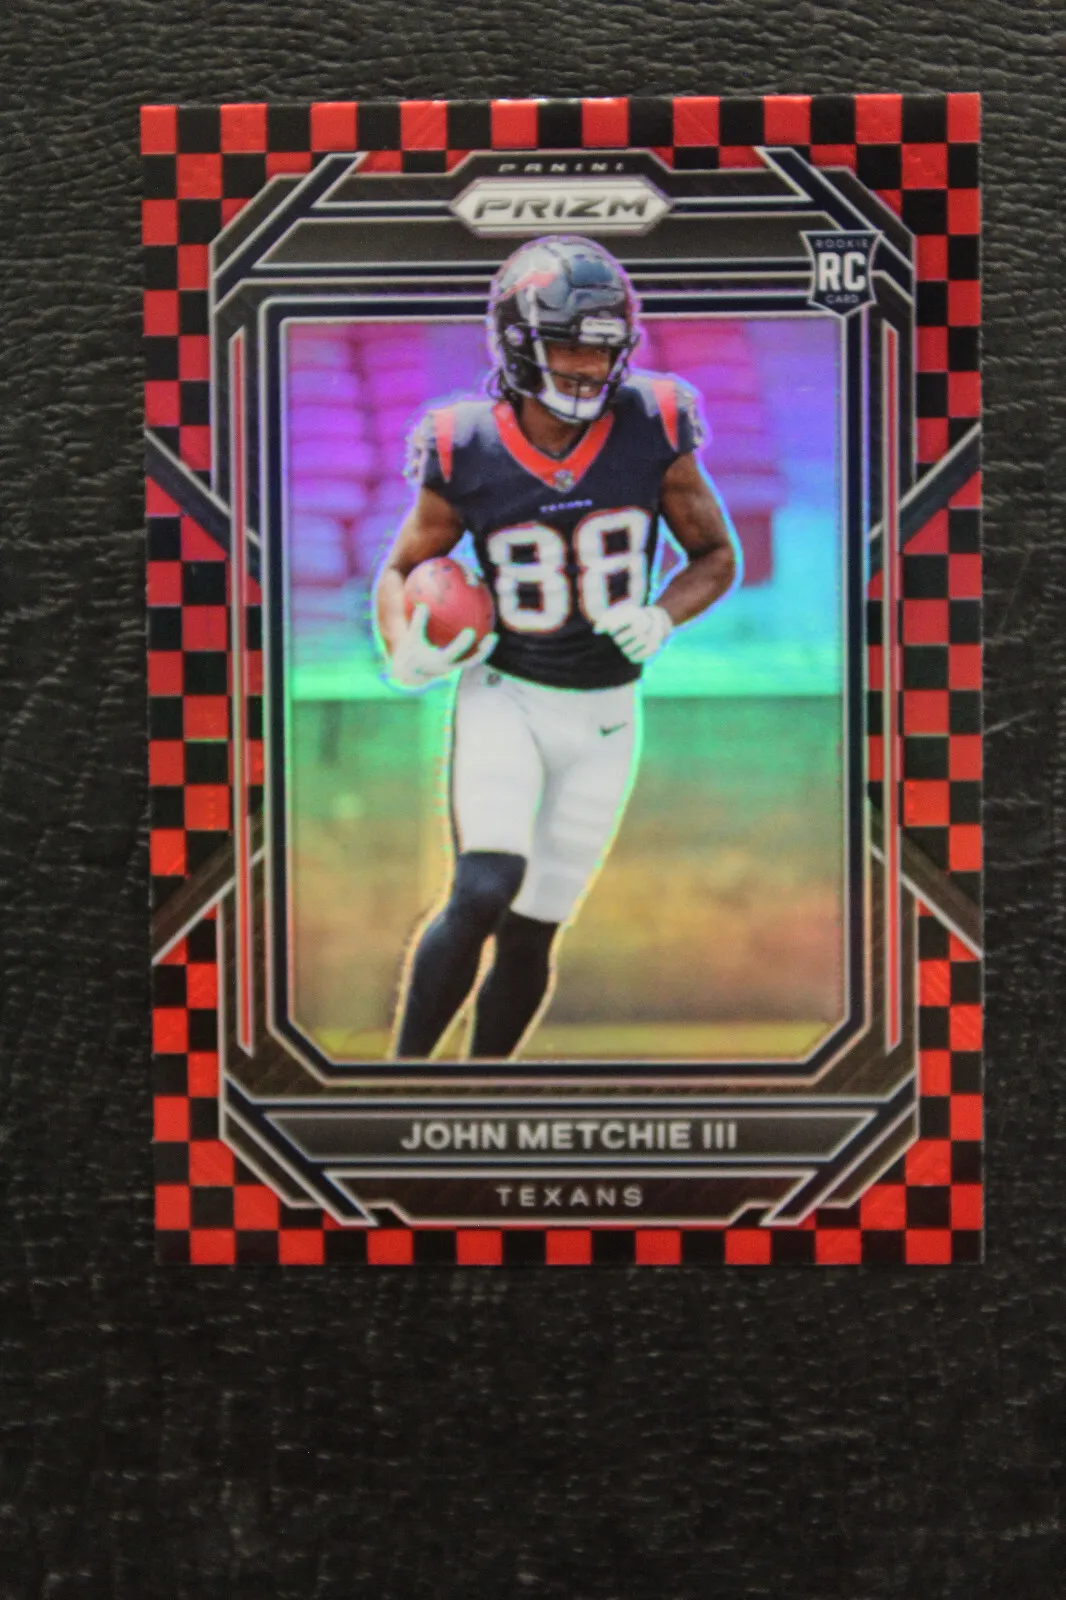 2022 Prizm Black and Red Checkerboard Prizm John Metchie Rookie #316 Texans